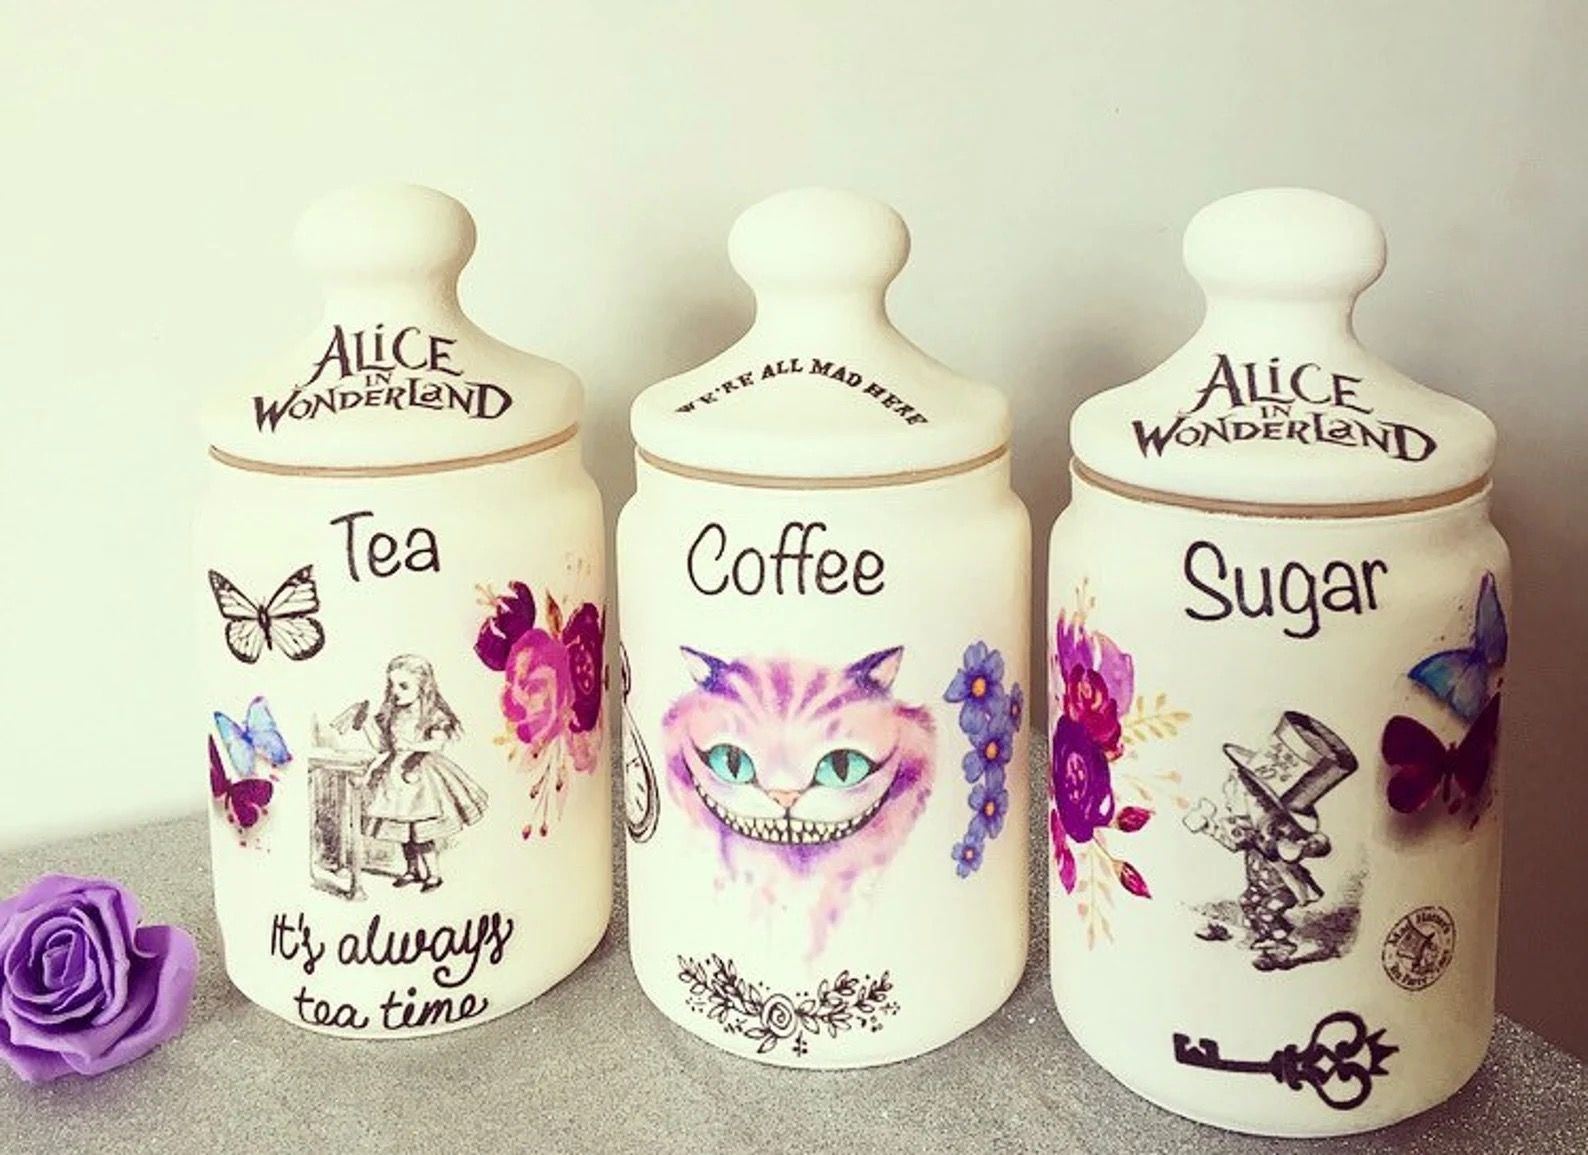 Three white ceramic crocks labeled for tea, coffee, and sugar. Each one has different images from Alice in Wonderland, including the mad hatter, the Chershire cat, and Alice.